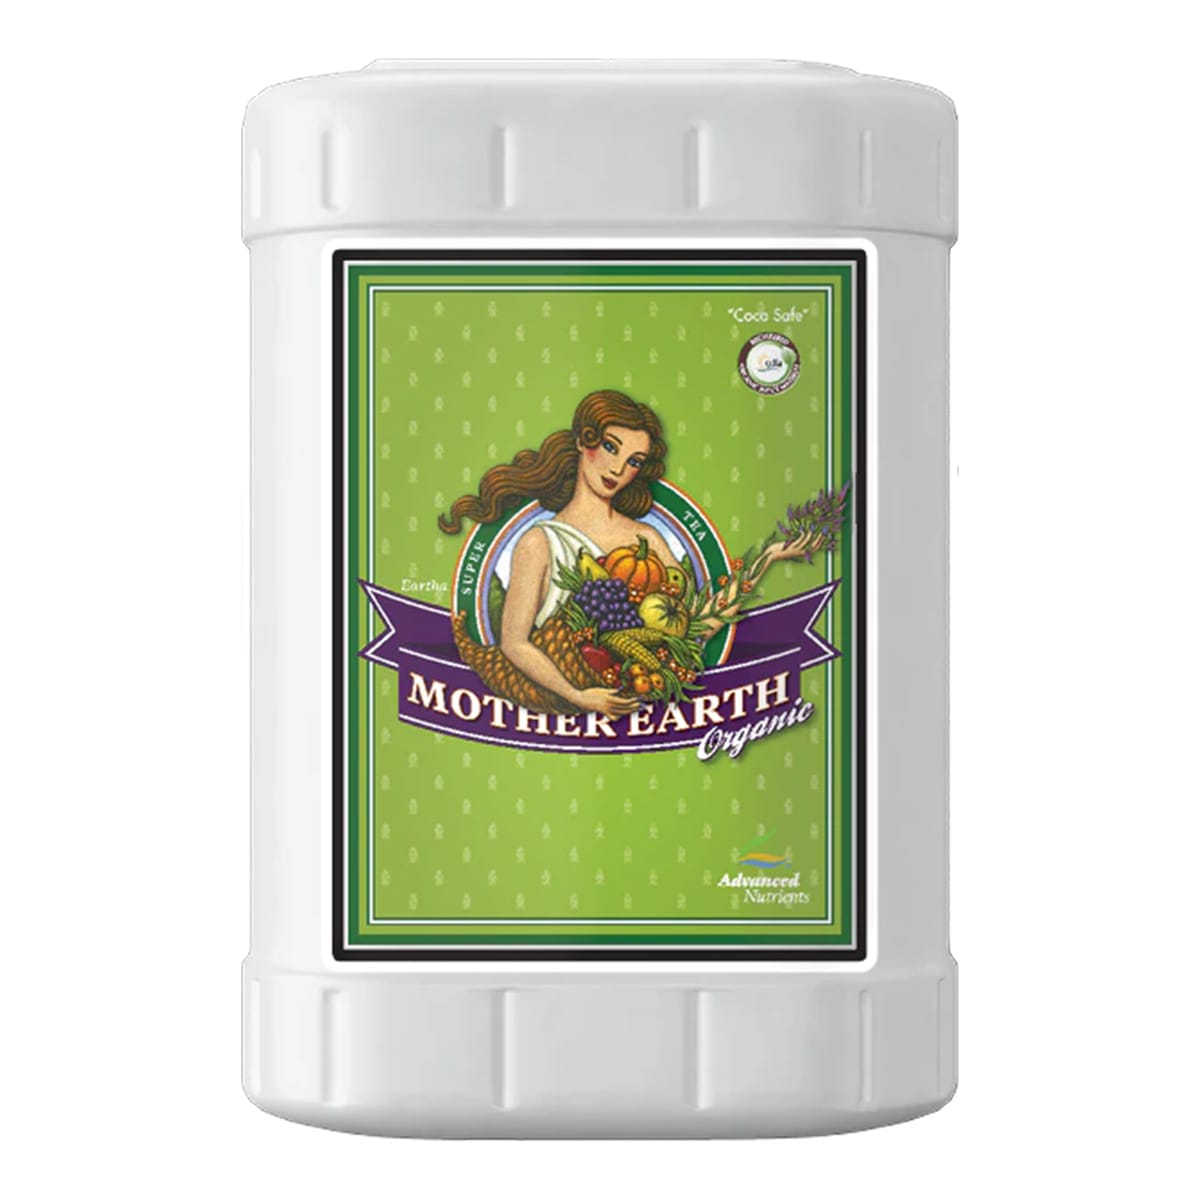 Advanced Nutrients Mother Earth Organic 23L